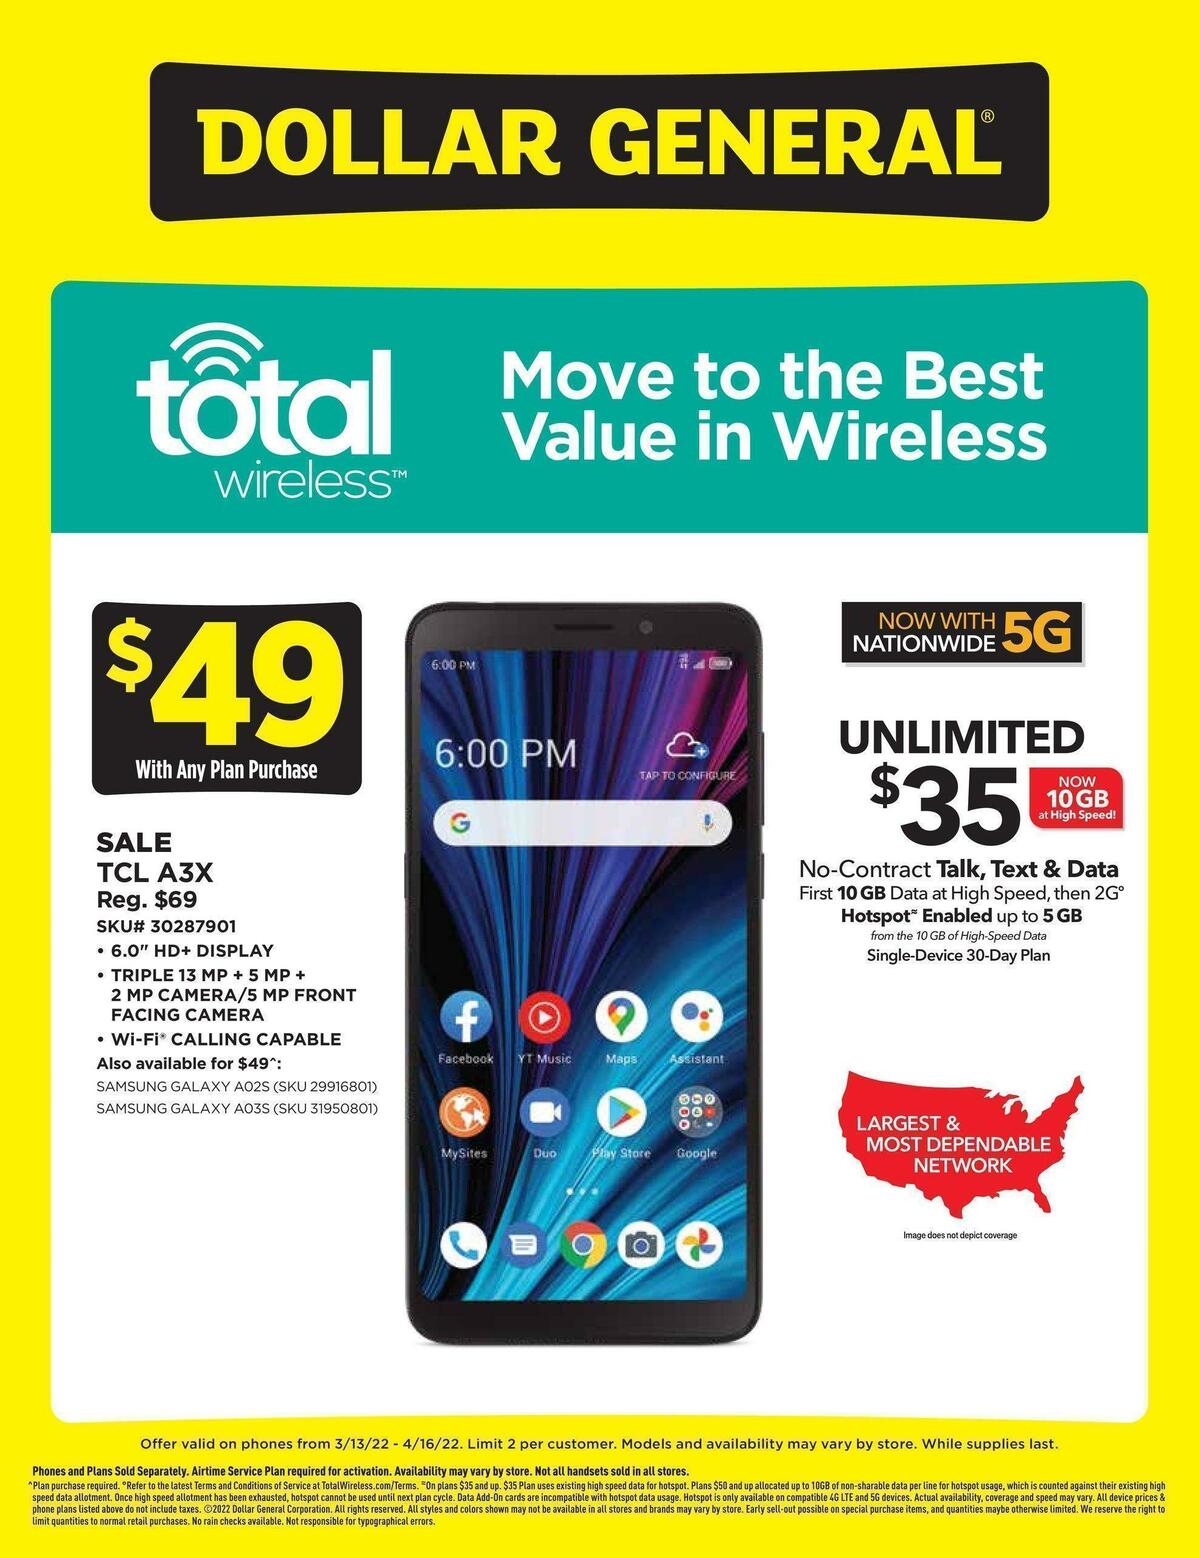 Dollar General Weekly Wireless Specials Weekly Ad from March 13